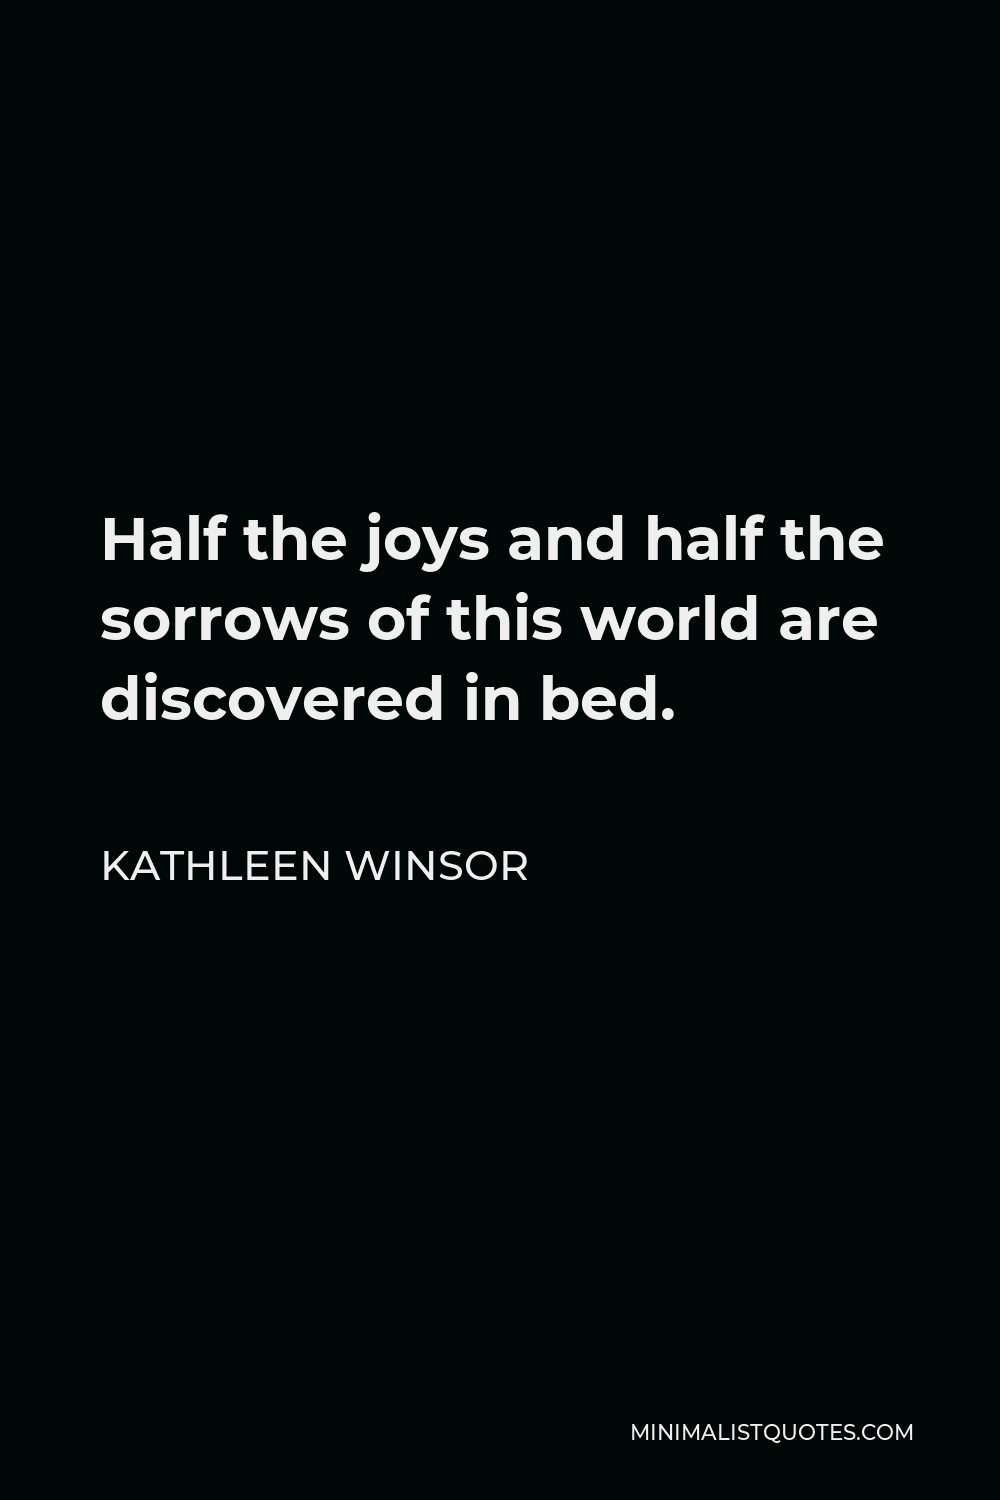 Kathleen Winsor Quote - Half the joys and half the sorrows of this world are discovered in bed.